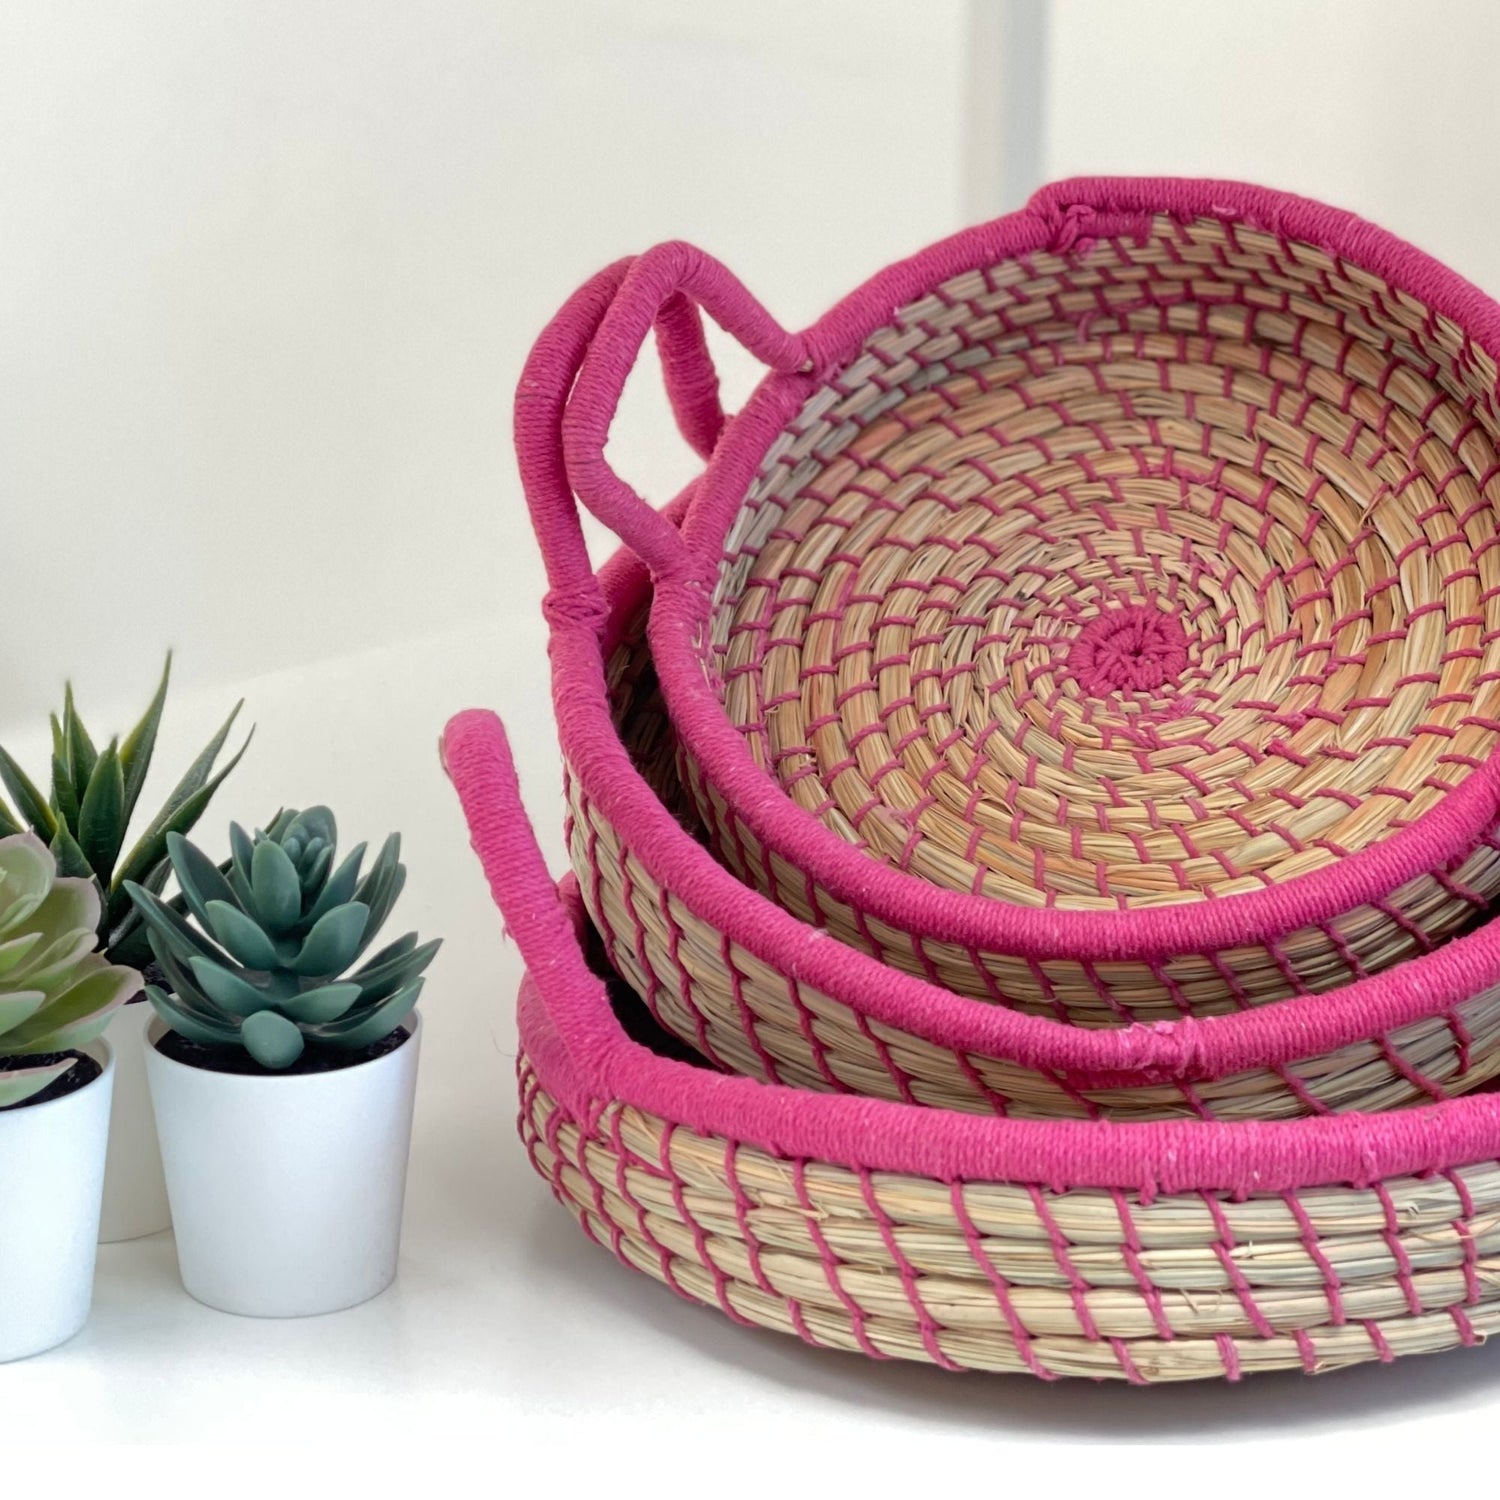 nested-baskets-in-natural-with-pink-accents-set-of-3